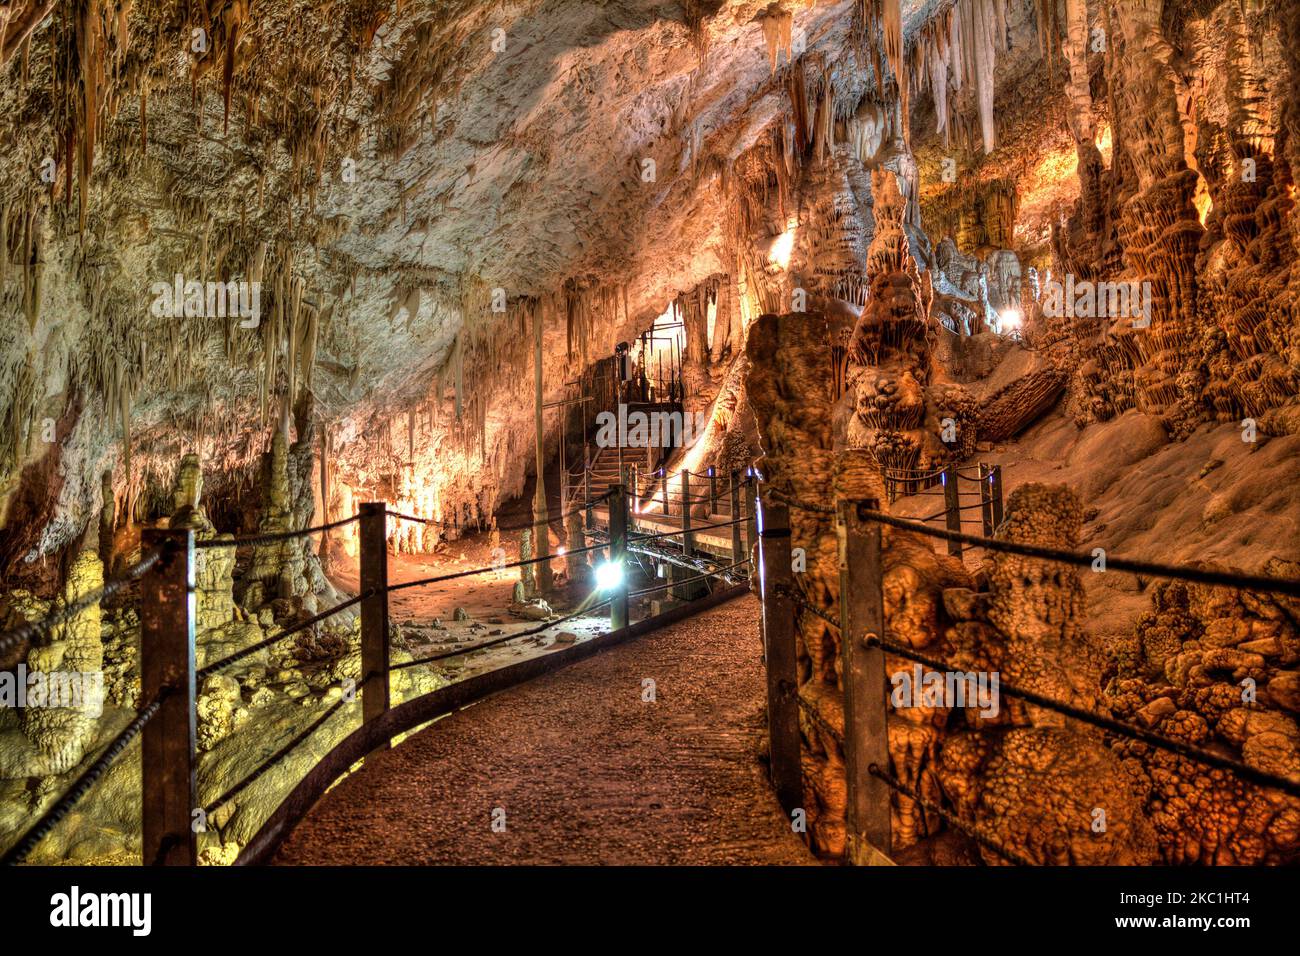 The Stalactites Cave, Avshalom Cave, in israel Stock Photo